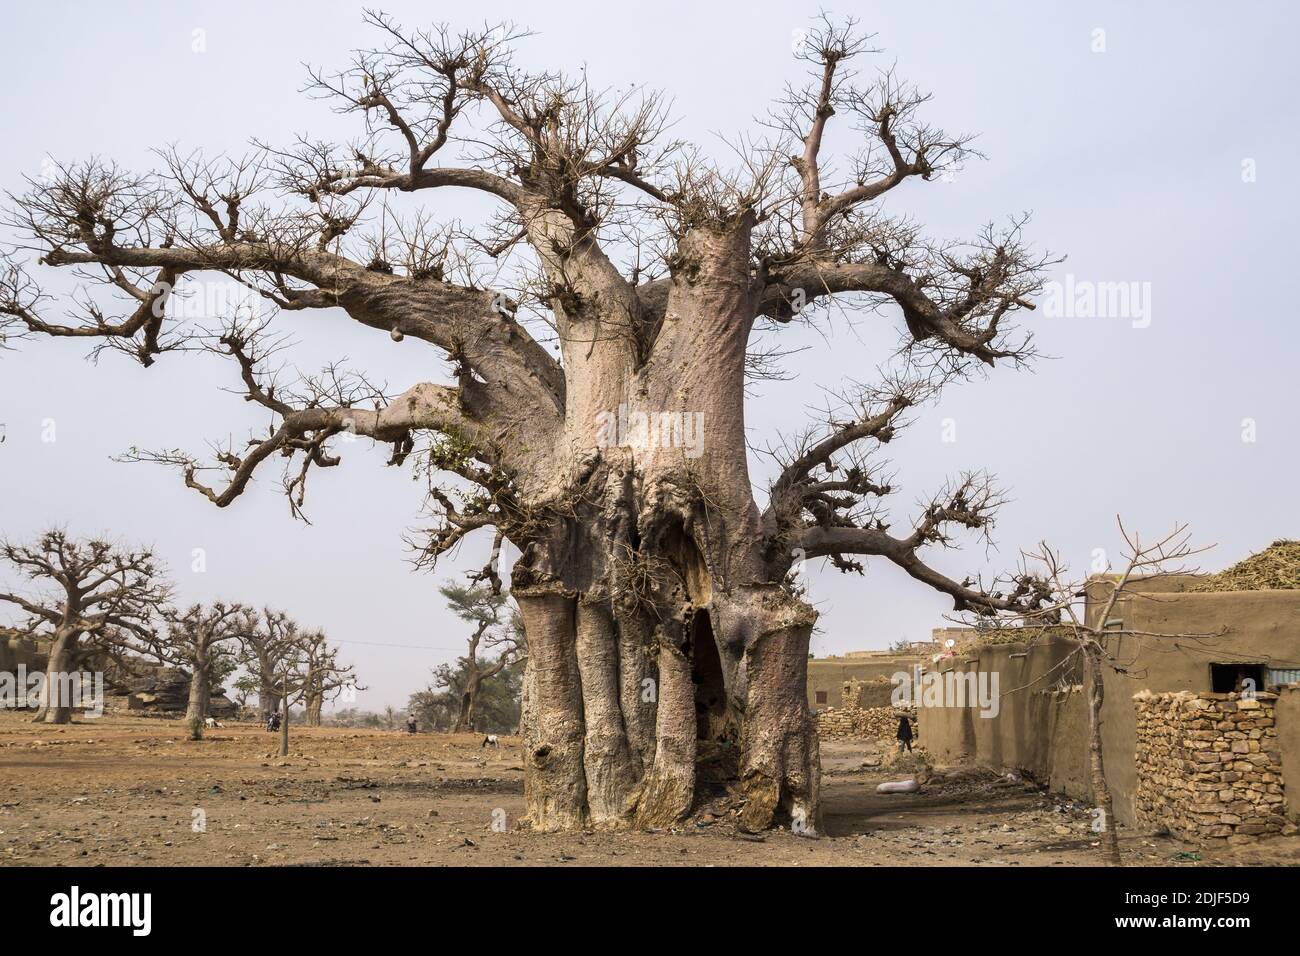 Giant Baobab trees in Pays Dogon, Mali, West Africa Stock Photo